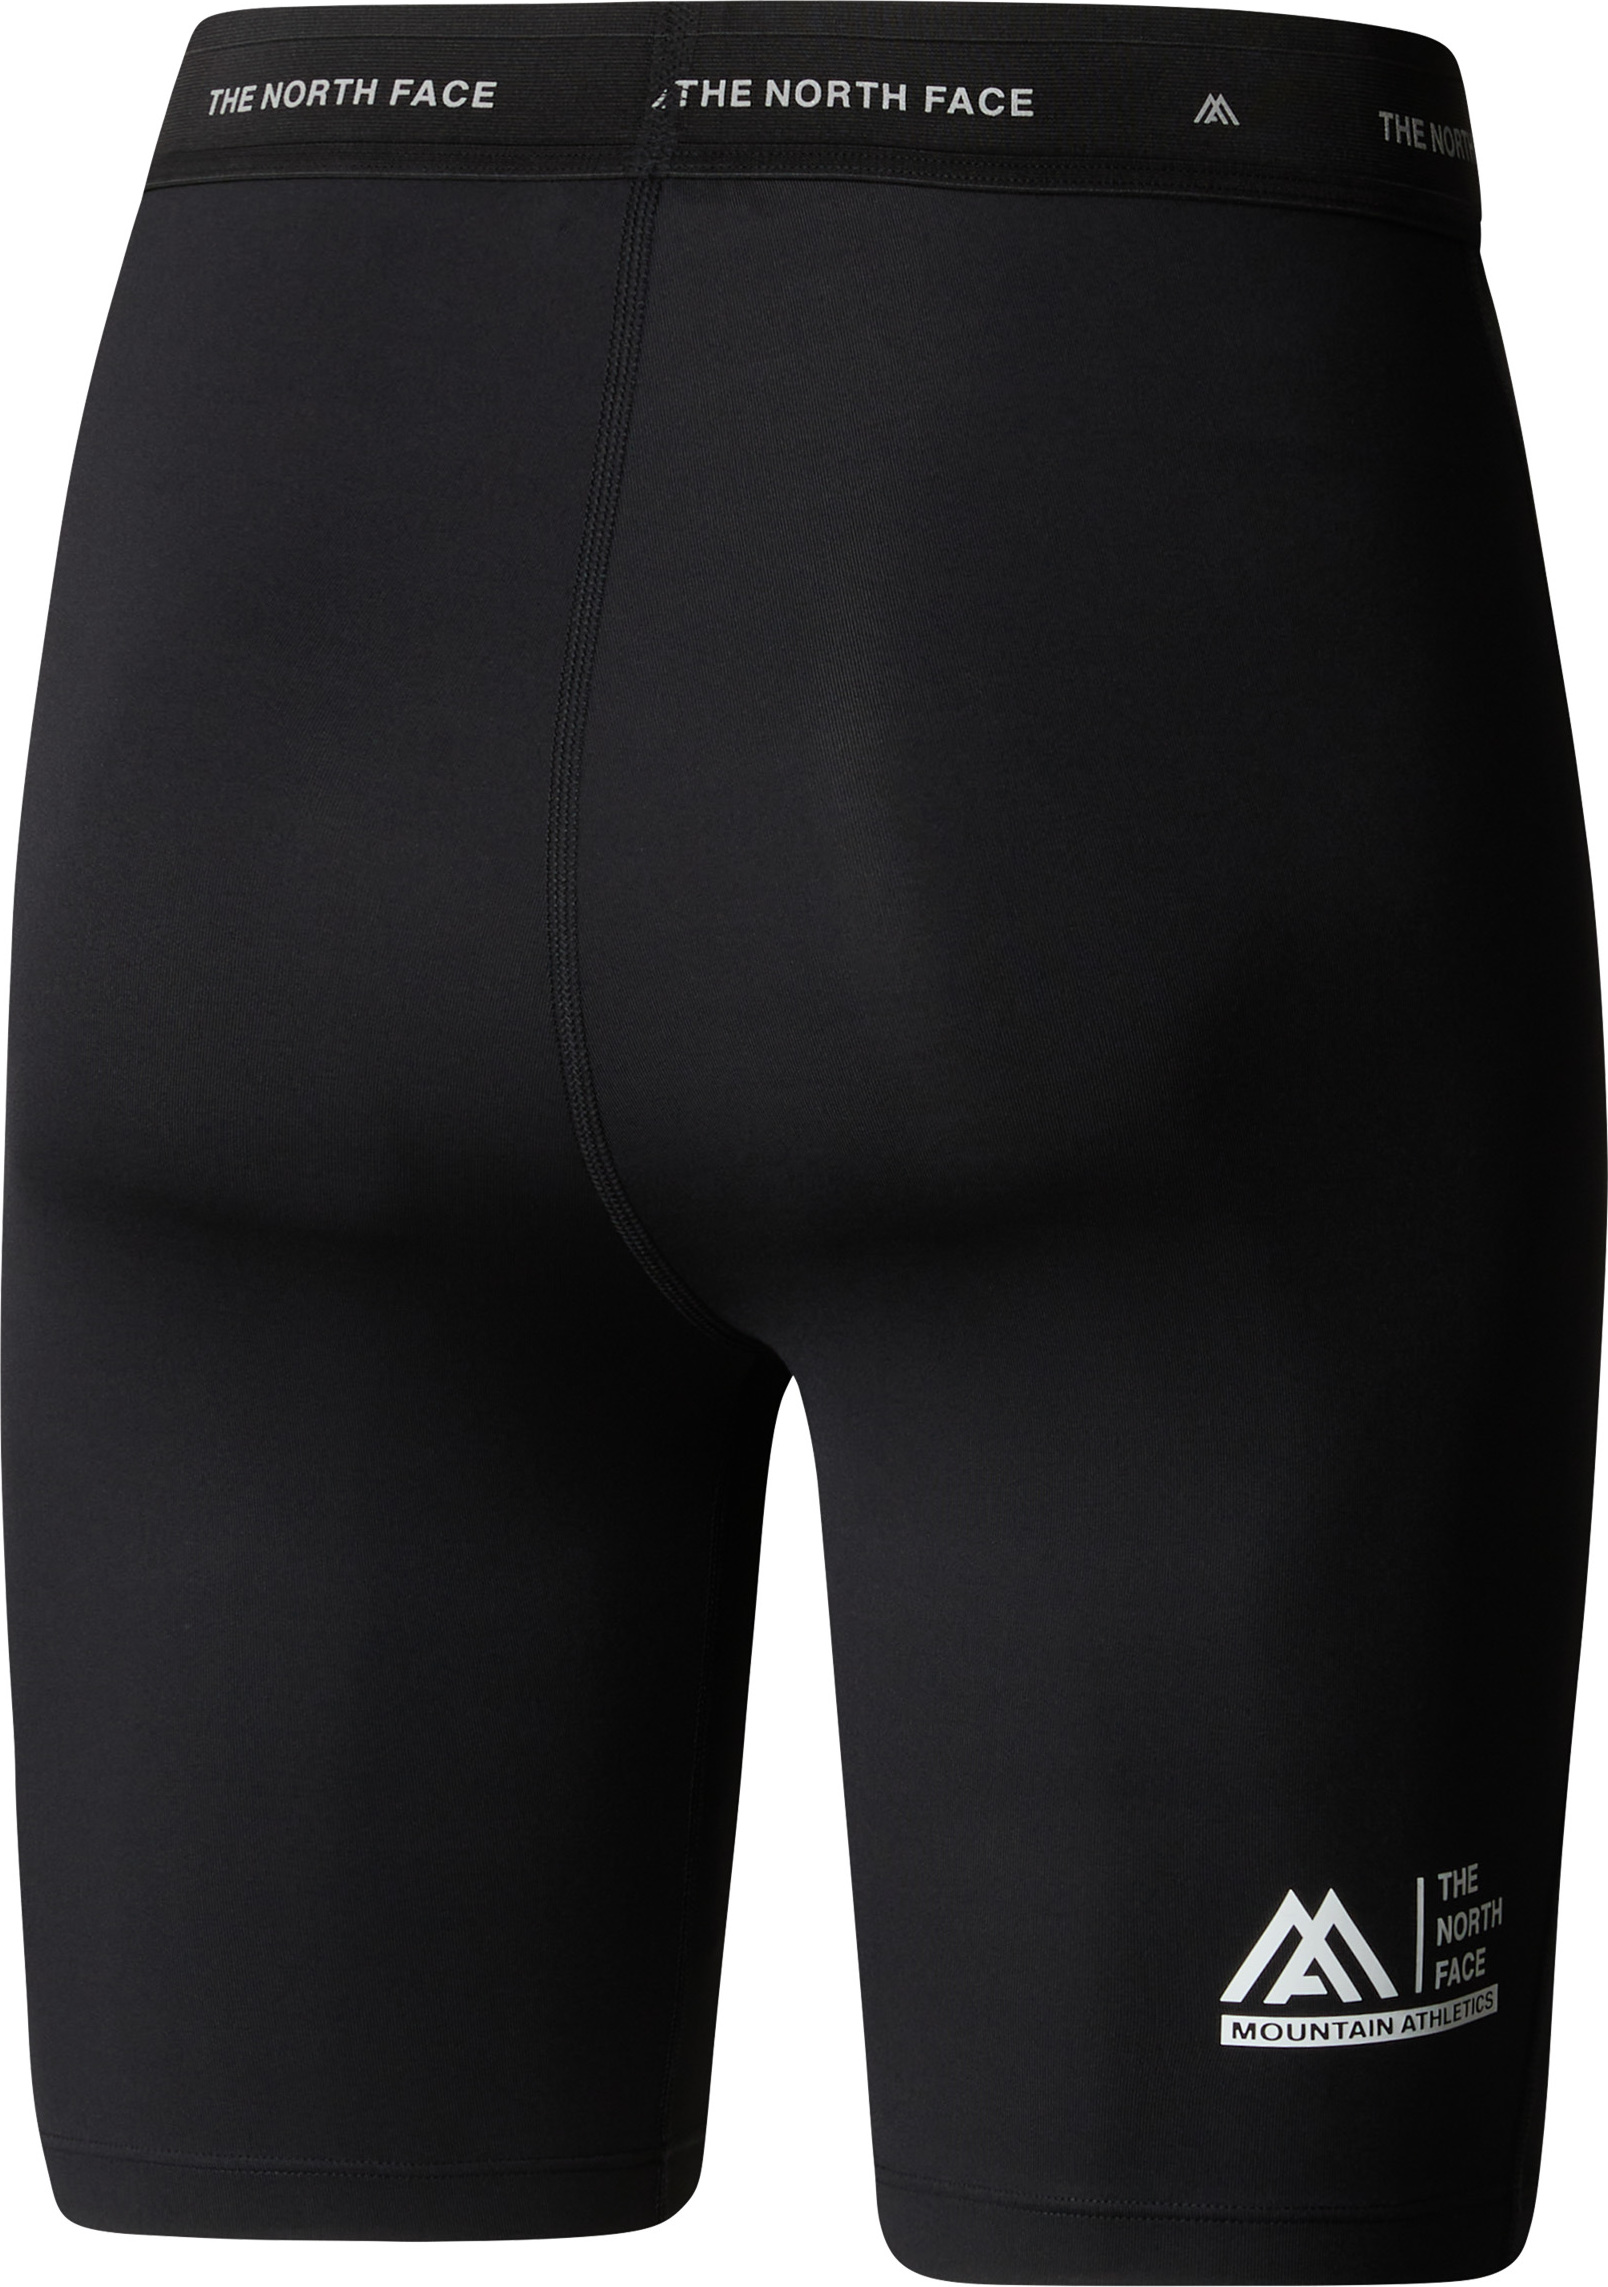 The North Face Mountain Athletics Running Tights - Black